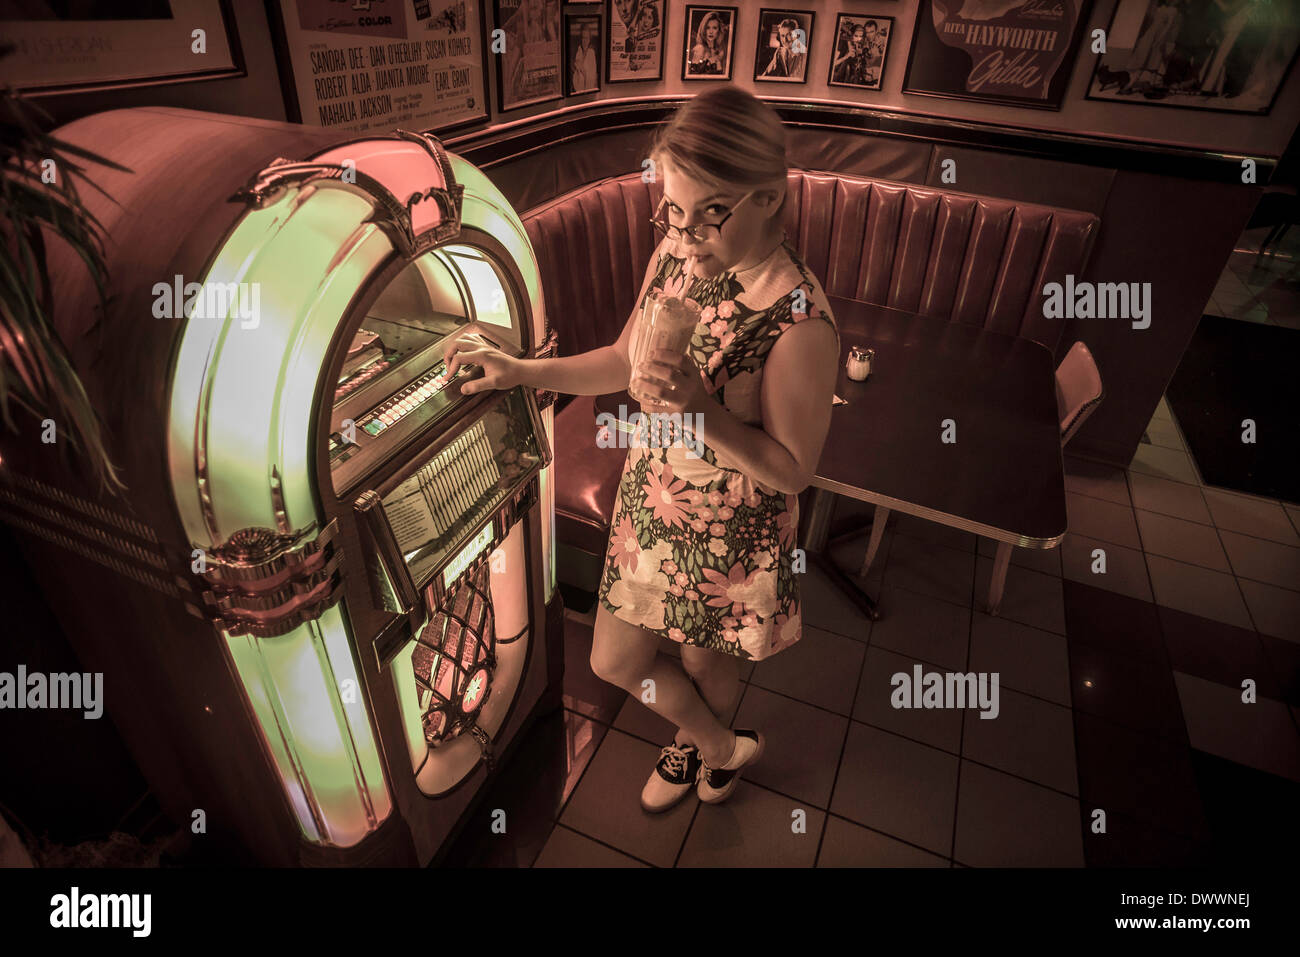 A 16-year-old Caucasian teenager wearing a 1950's, flowered dress stands next to a jukebox at an historic diner in Cortland, NY. Stock Photo